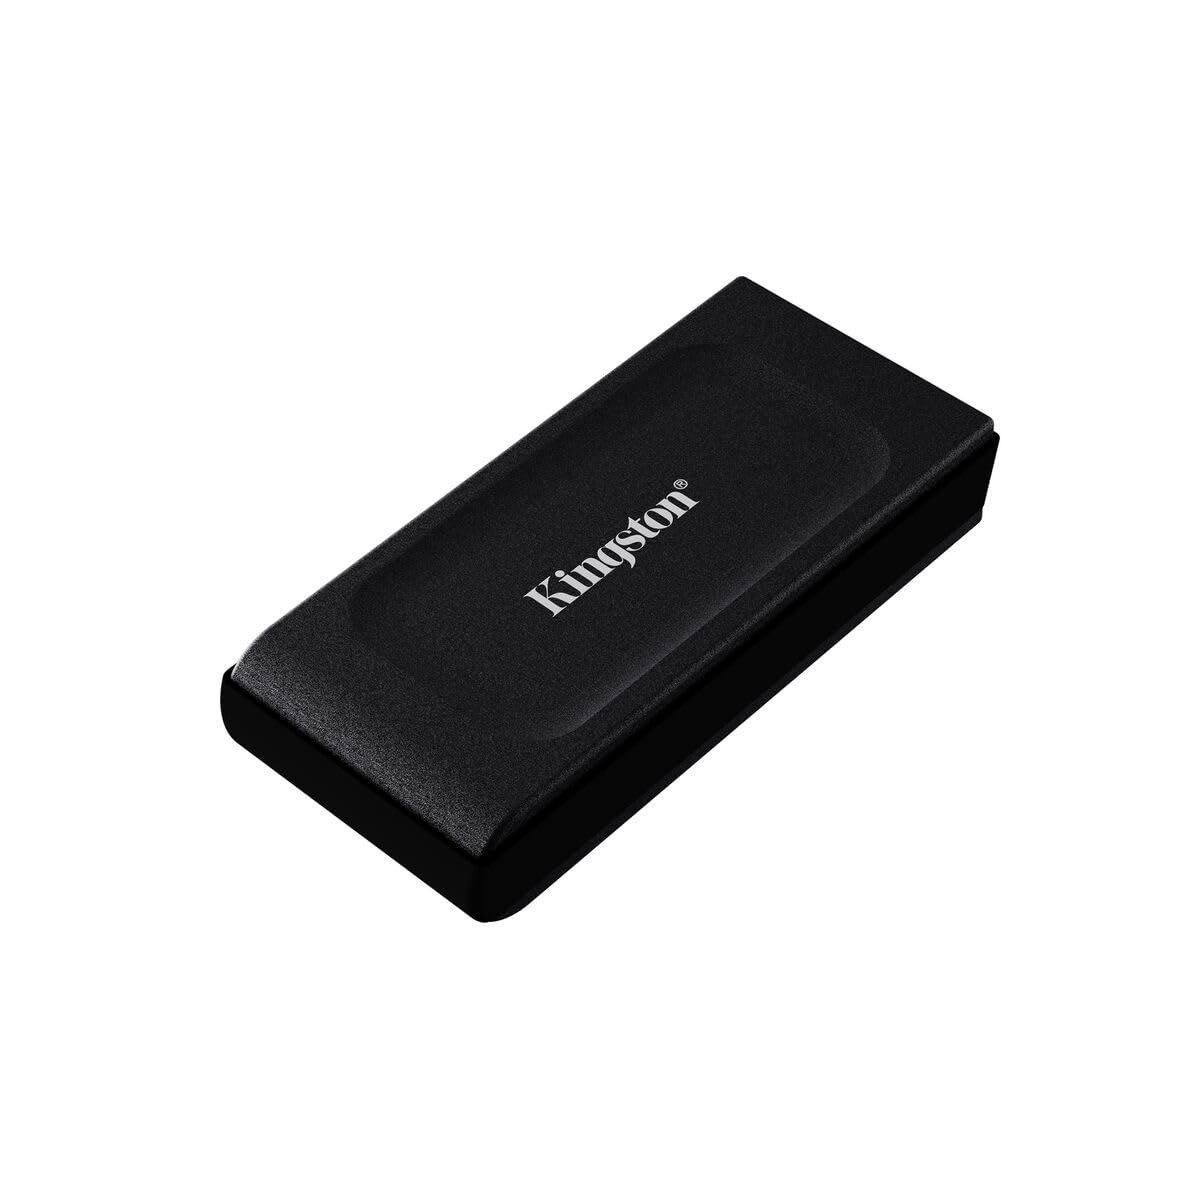 Kingston XS1000 2TB SSD | Pocket-Sized | USB 3.2 Gen 2 | External Solid State Drive | Up to 1050MB/s